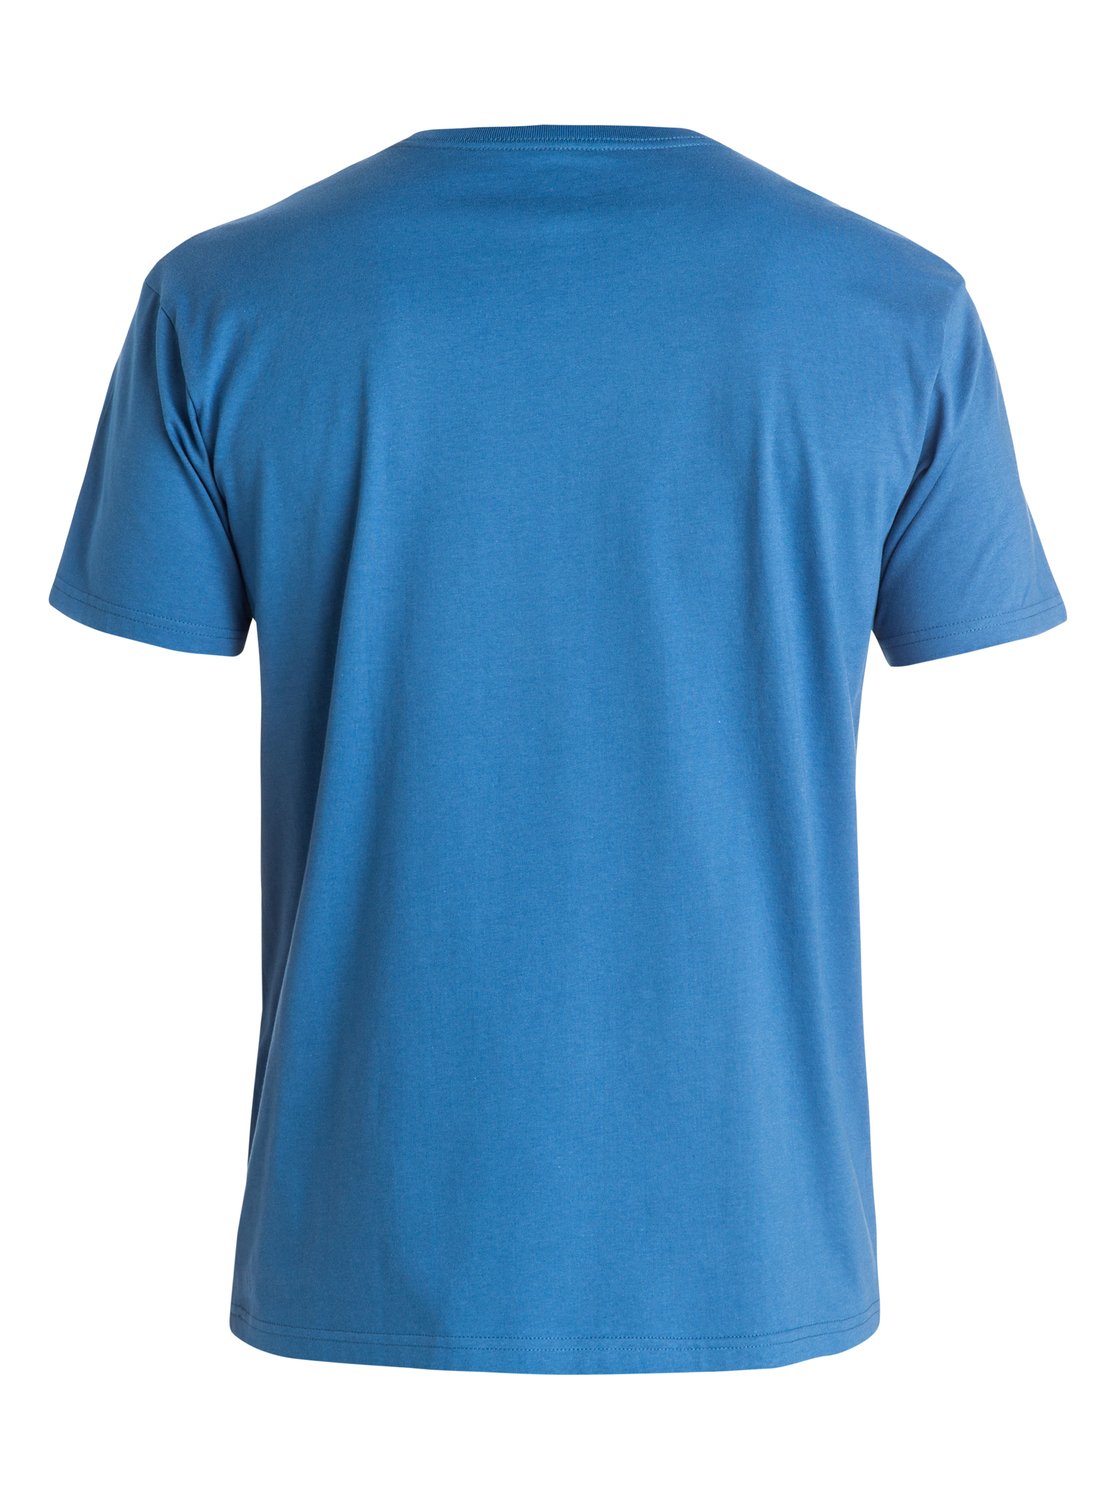 Classic The Wedge - T-Shirt EQYZT03423 | Quiksilver